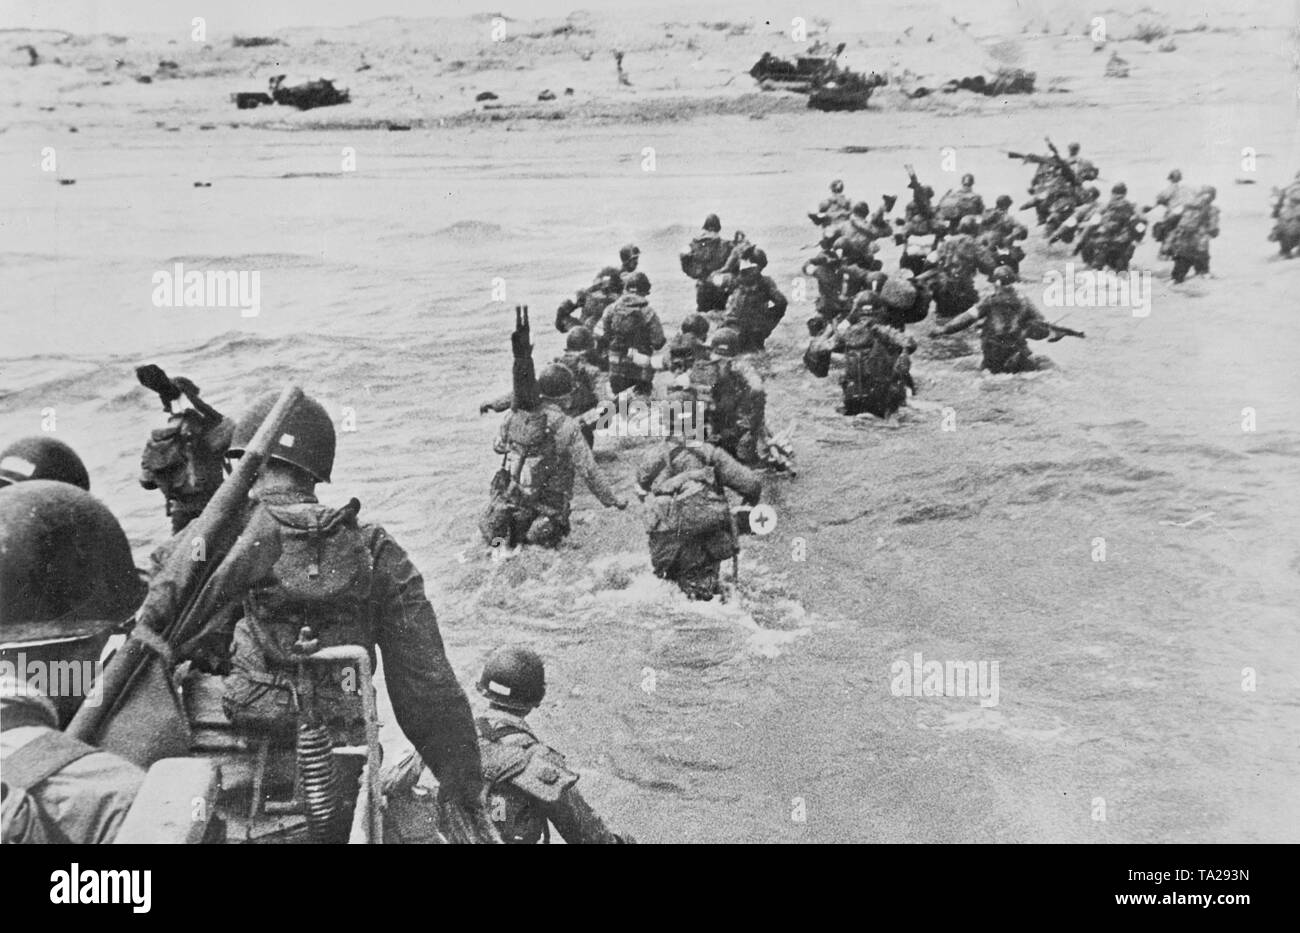 World War II, beach, island, soldiers, army, military, weapons, armed, uniform, shore, Second World War, WWII, WW2, Pacific Theatre of War, Pacific Theater of War, two, Stock Photo